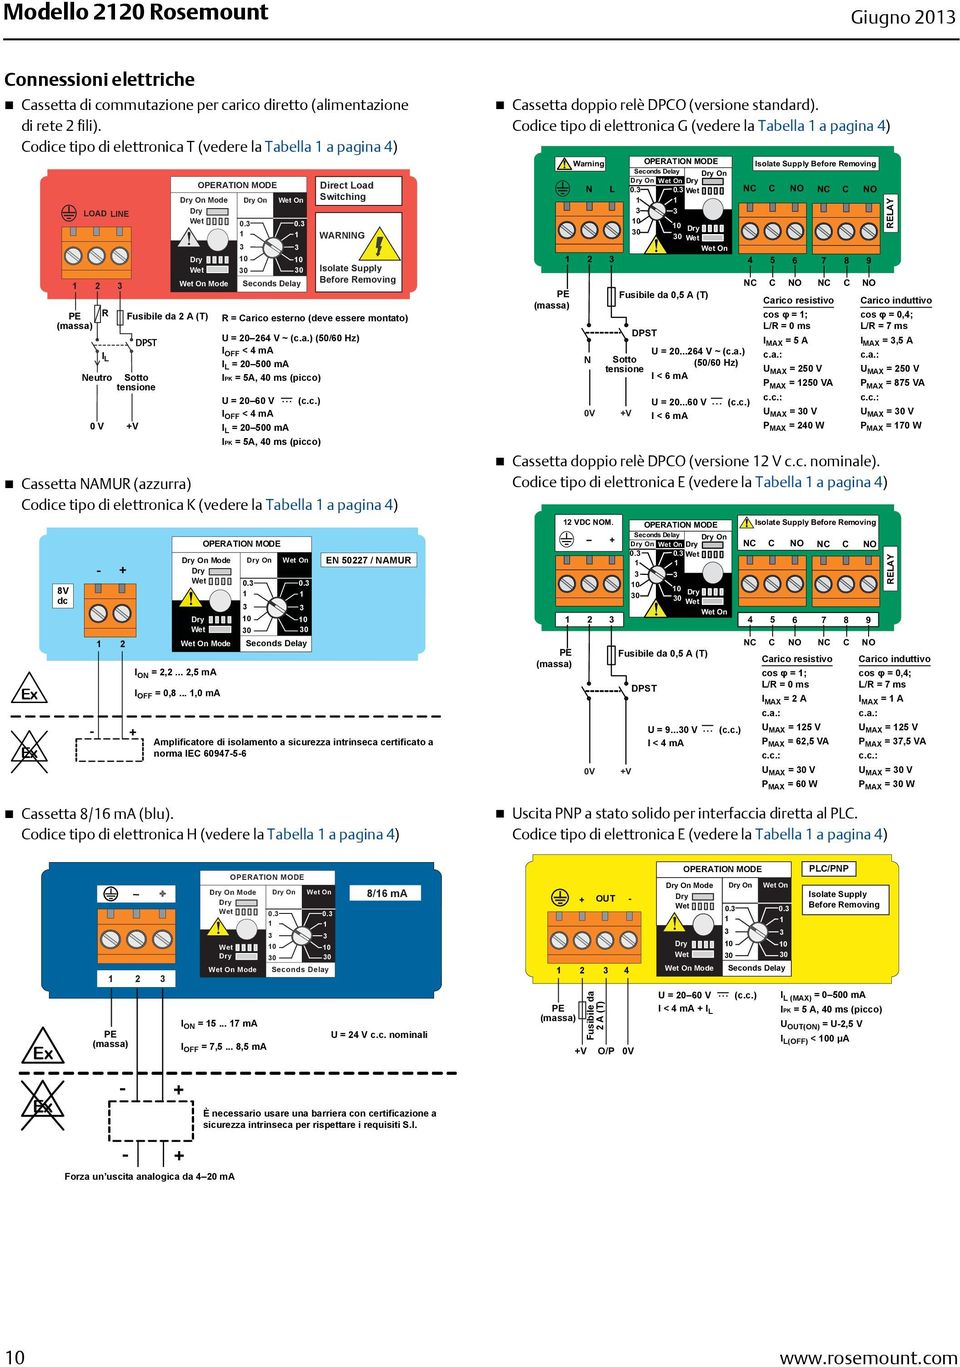 1 1 Dry Wet 10 0 10 0 Wet On Mode Seconds Delay Direct Load Switching WARNING Isolate Supply Before Removing PE R Fuse Fusibile 2A(T) da 2 A (T) R = R External = Carico load esterno (must (deve be